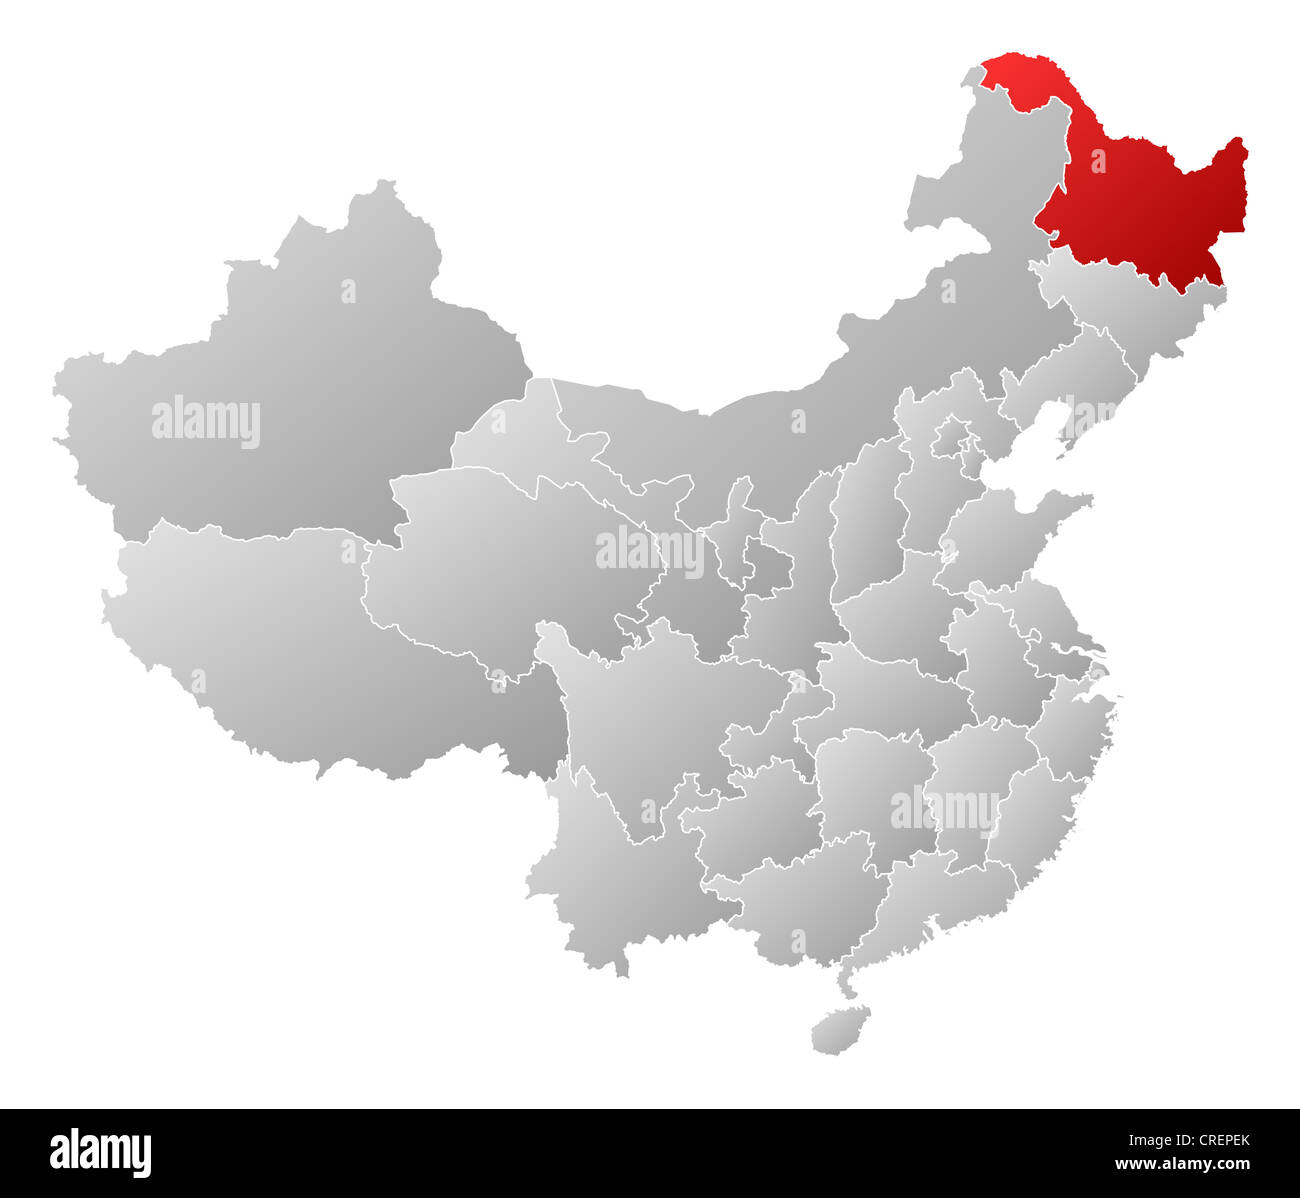 Political map of China with the several provinces where Heilongjiang is highlighted. Stock Photo